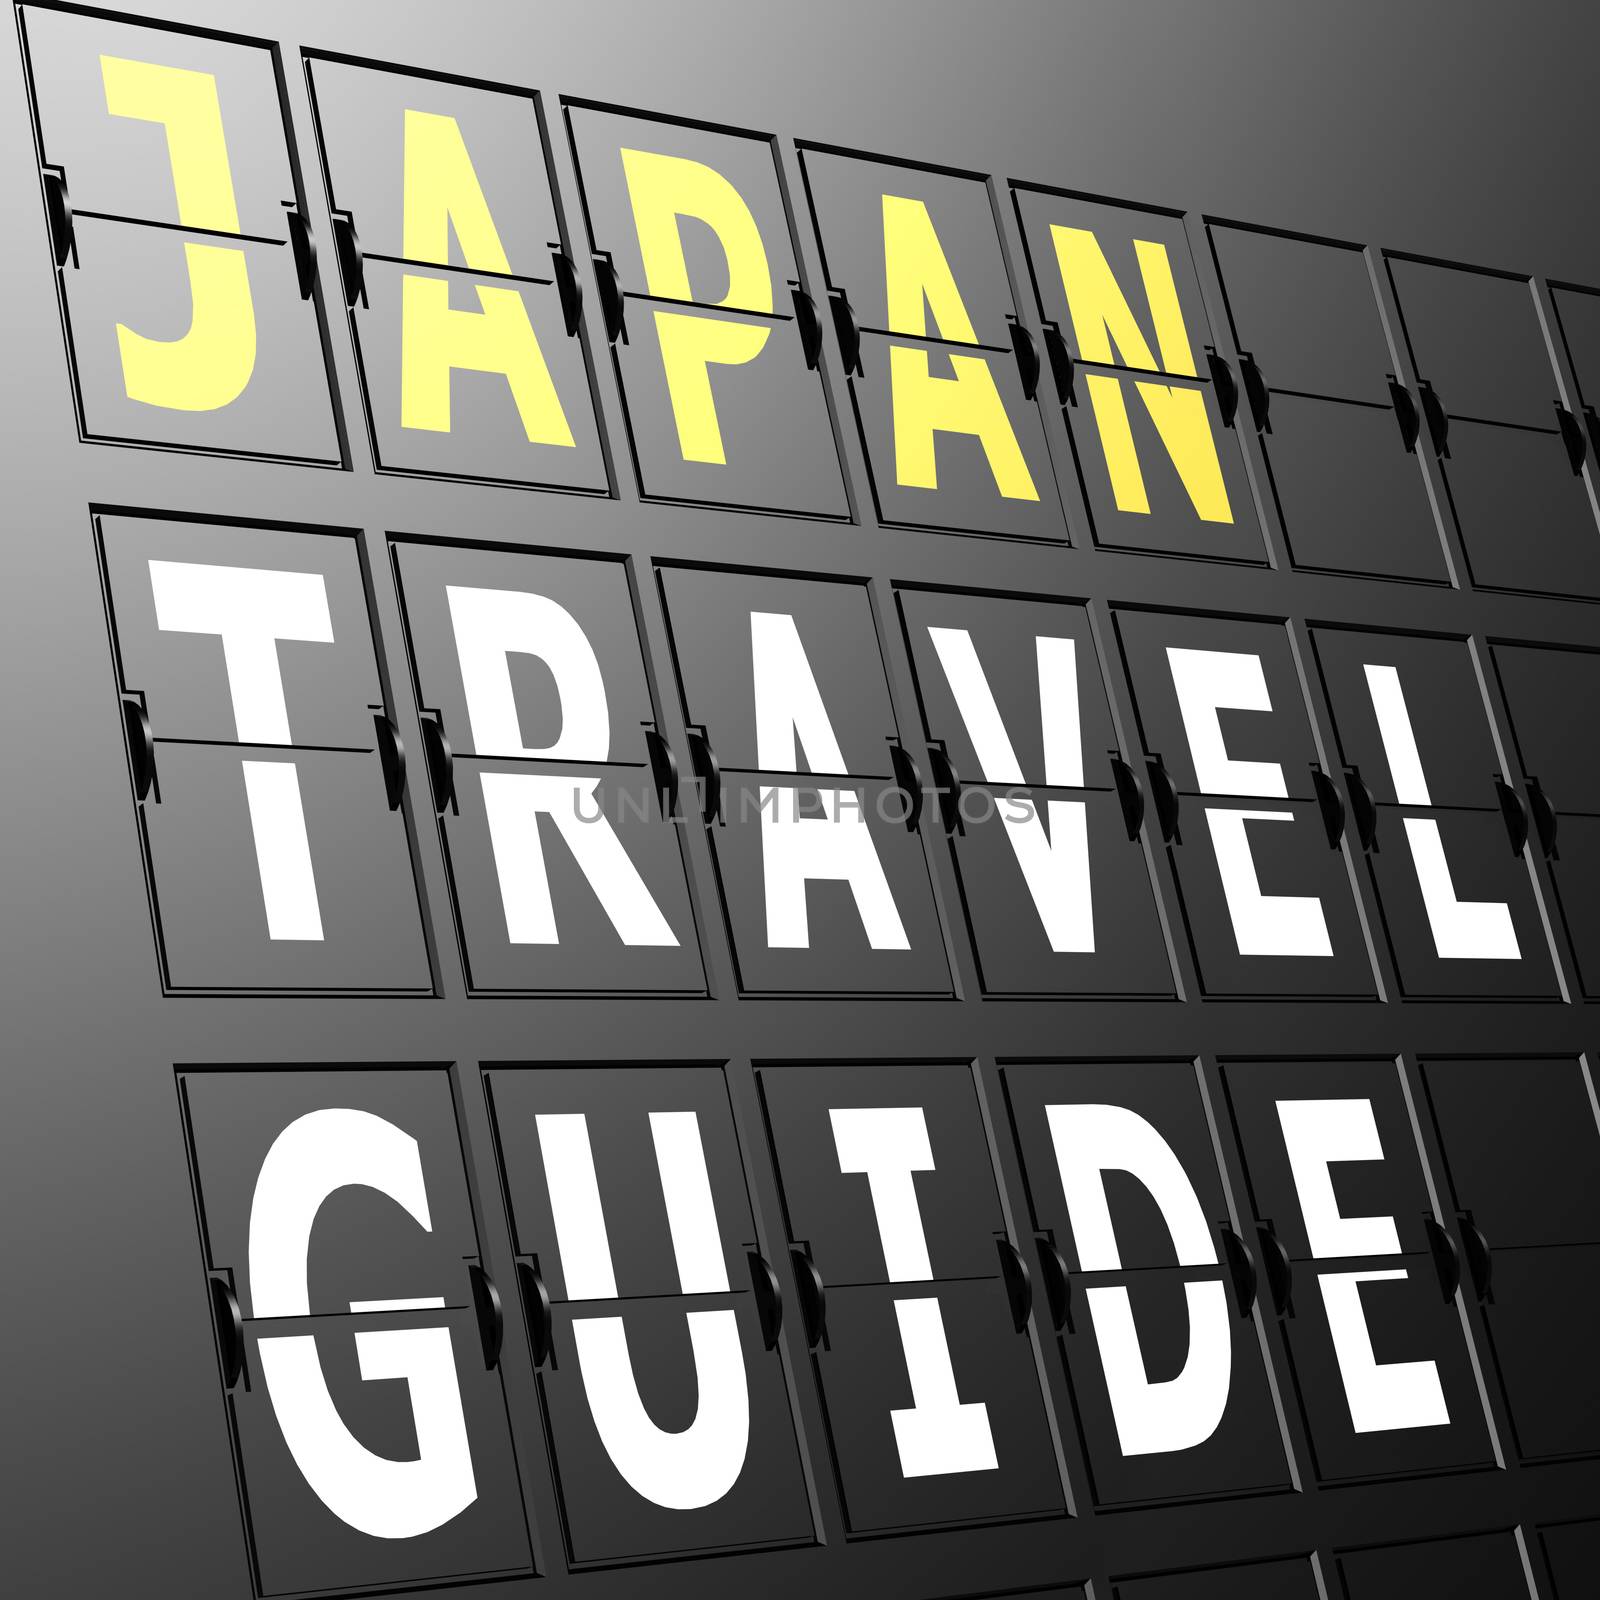 Airport display Japan travel guide by tang90246